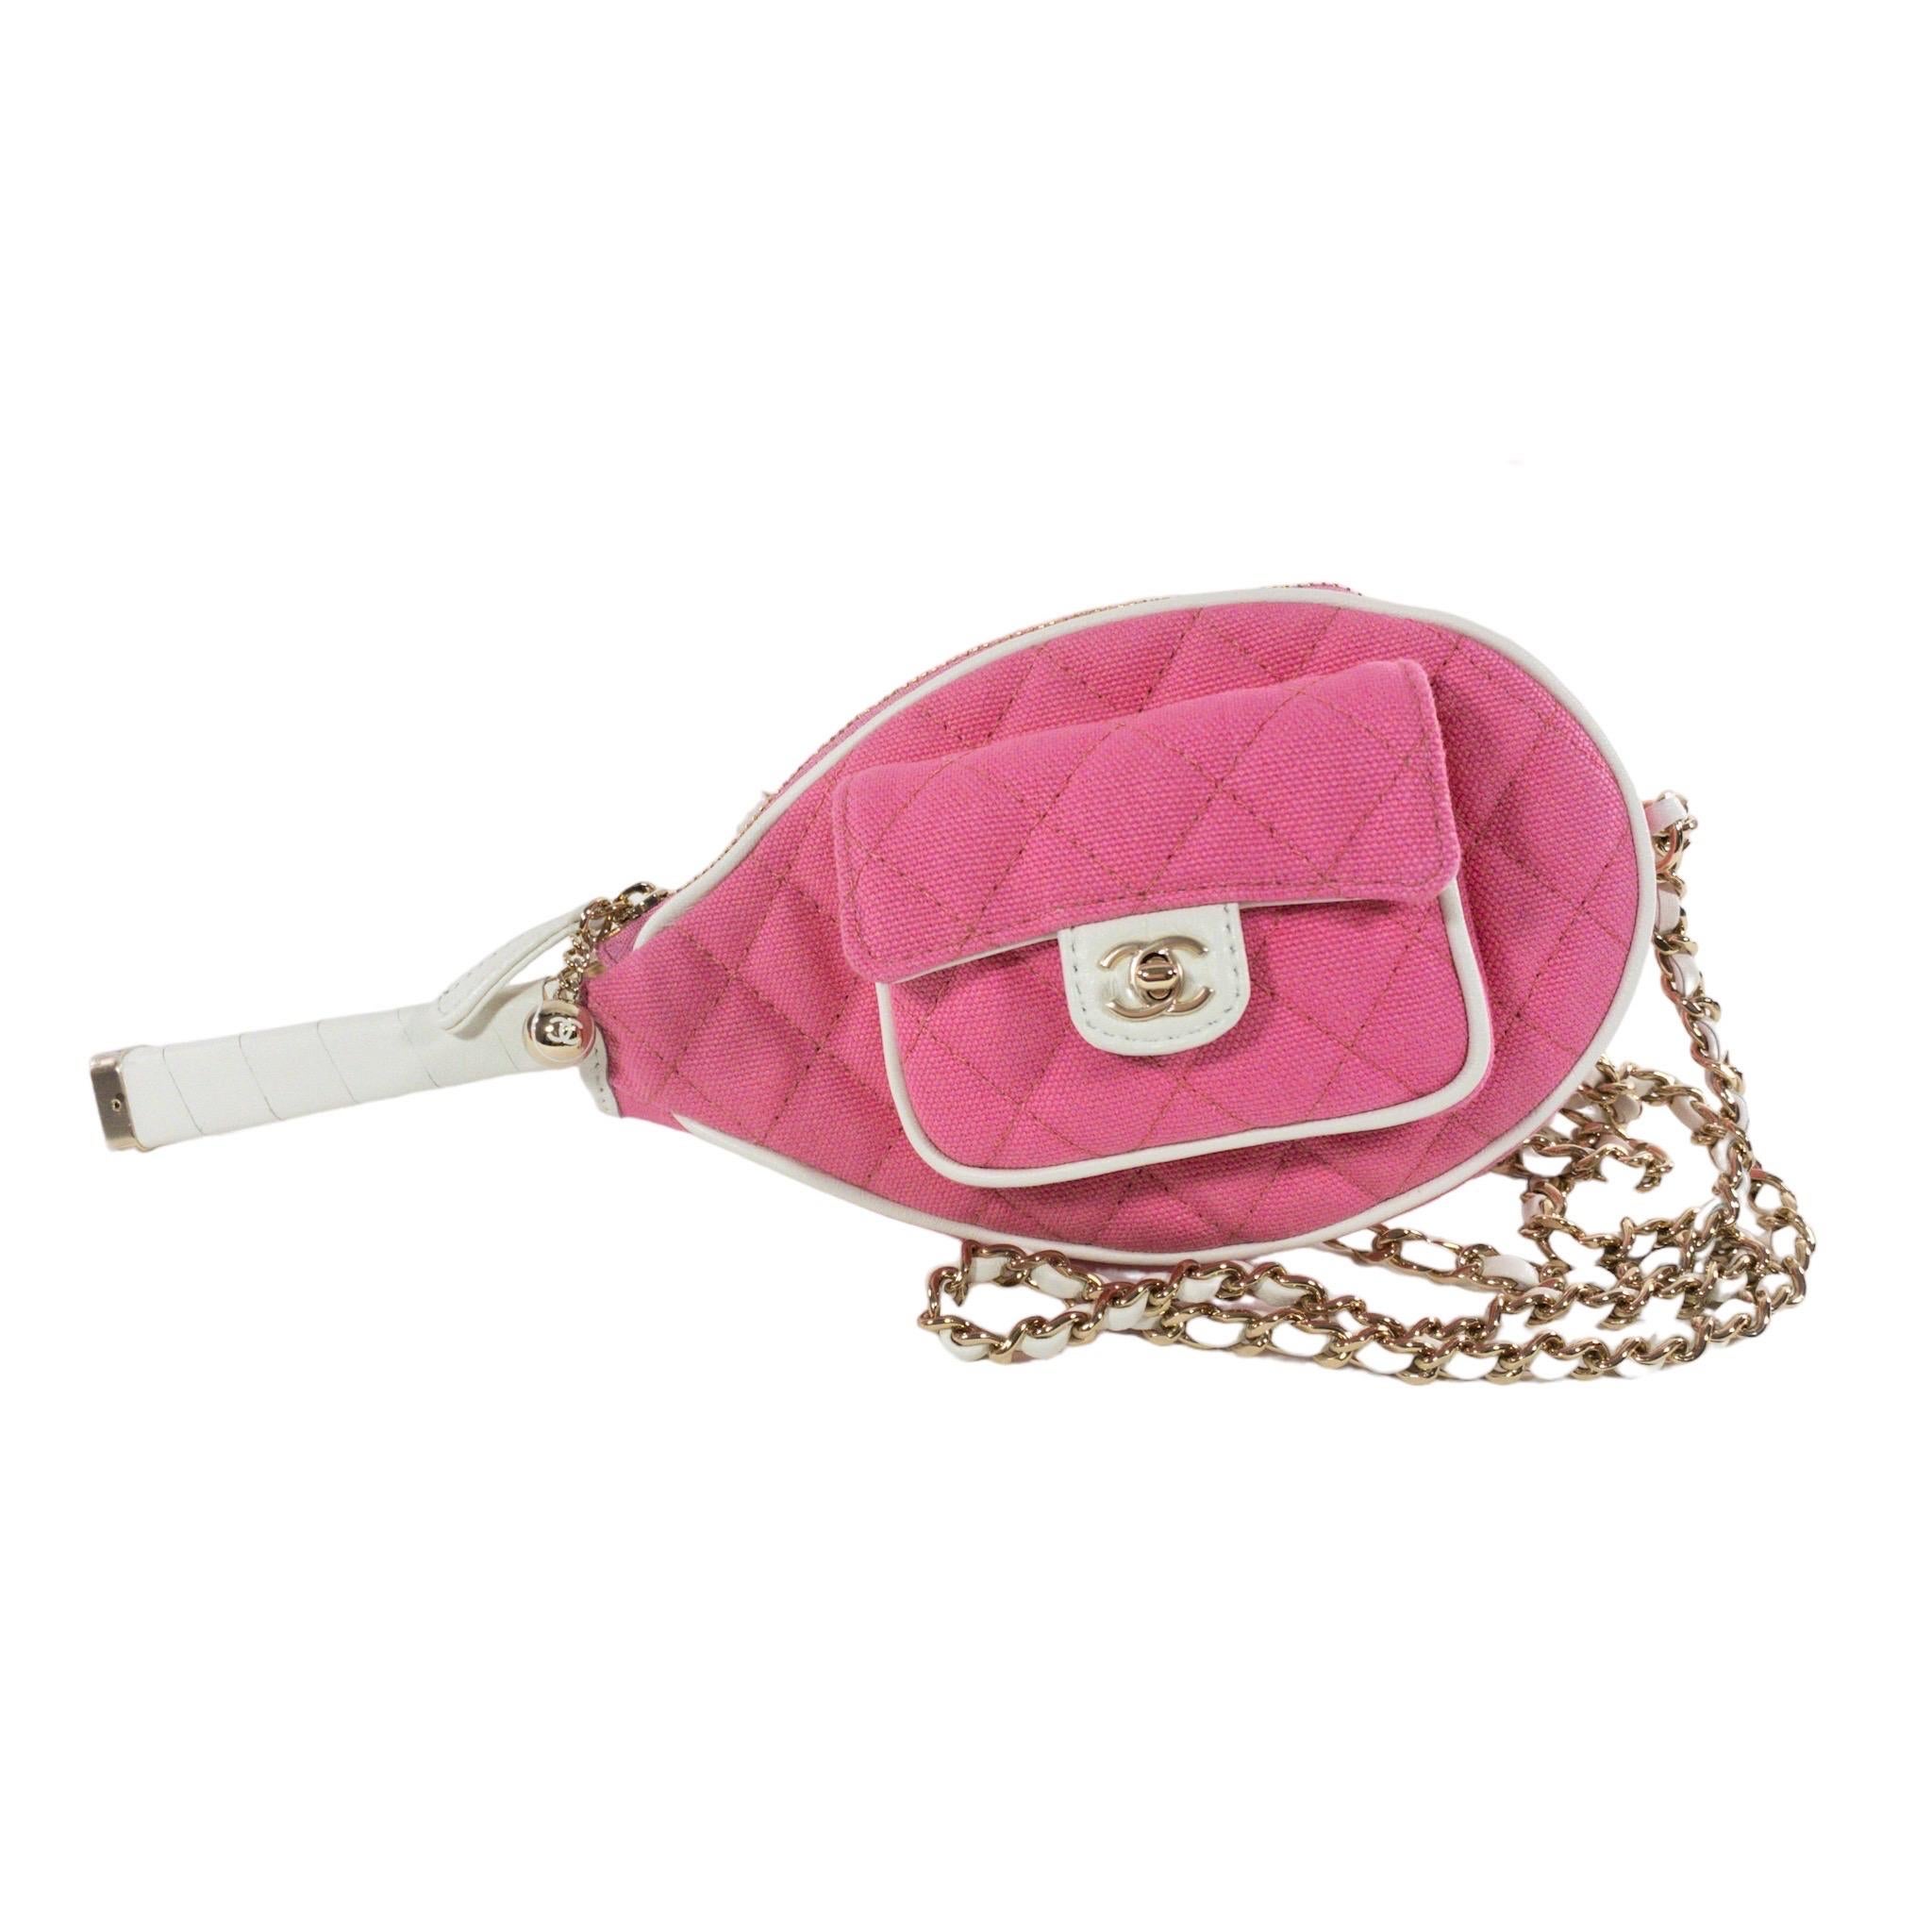 Consign of the Times presents this unique and authentic Chanel Tennis Racket Hand Mirror Case. Pink quilted fabric exterior with white leather trim. Small flap pocket in front with CC turn clasp, zipper at top. Wooden hand mirror inside in the shape